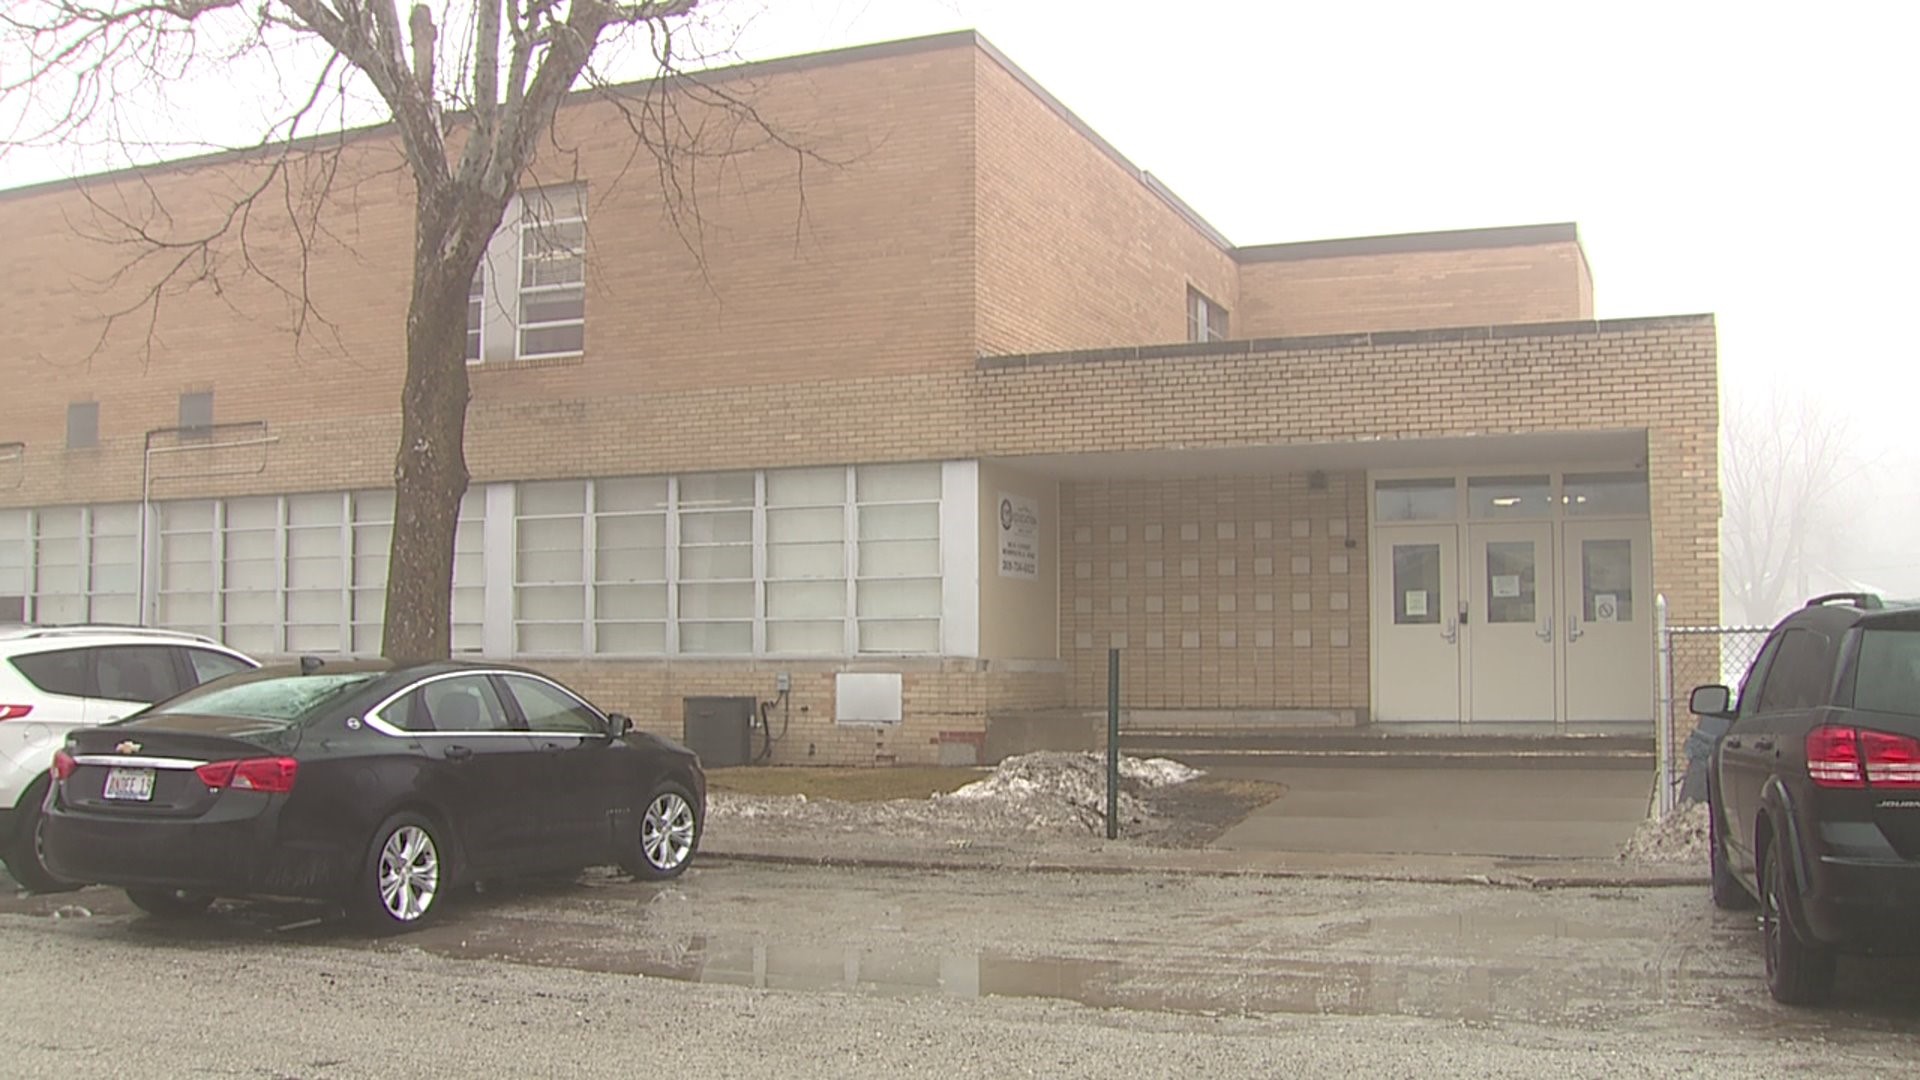 Student stopped with pellet gun at Monmouth alternative school